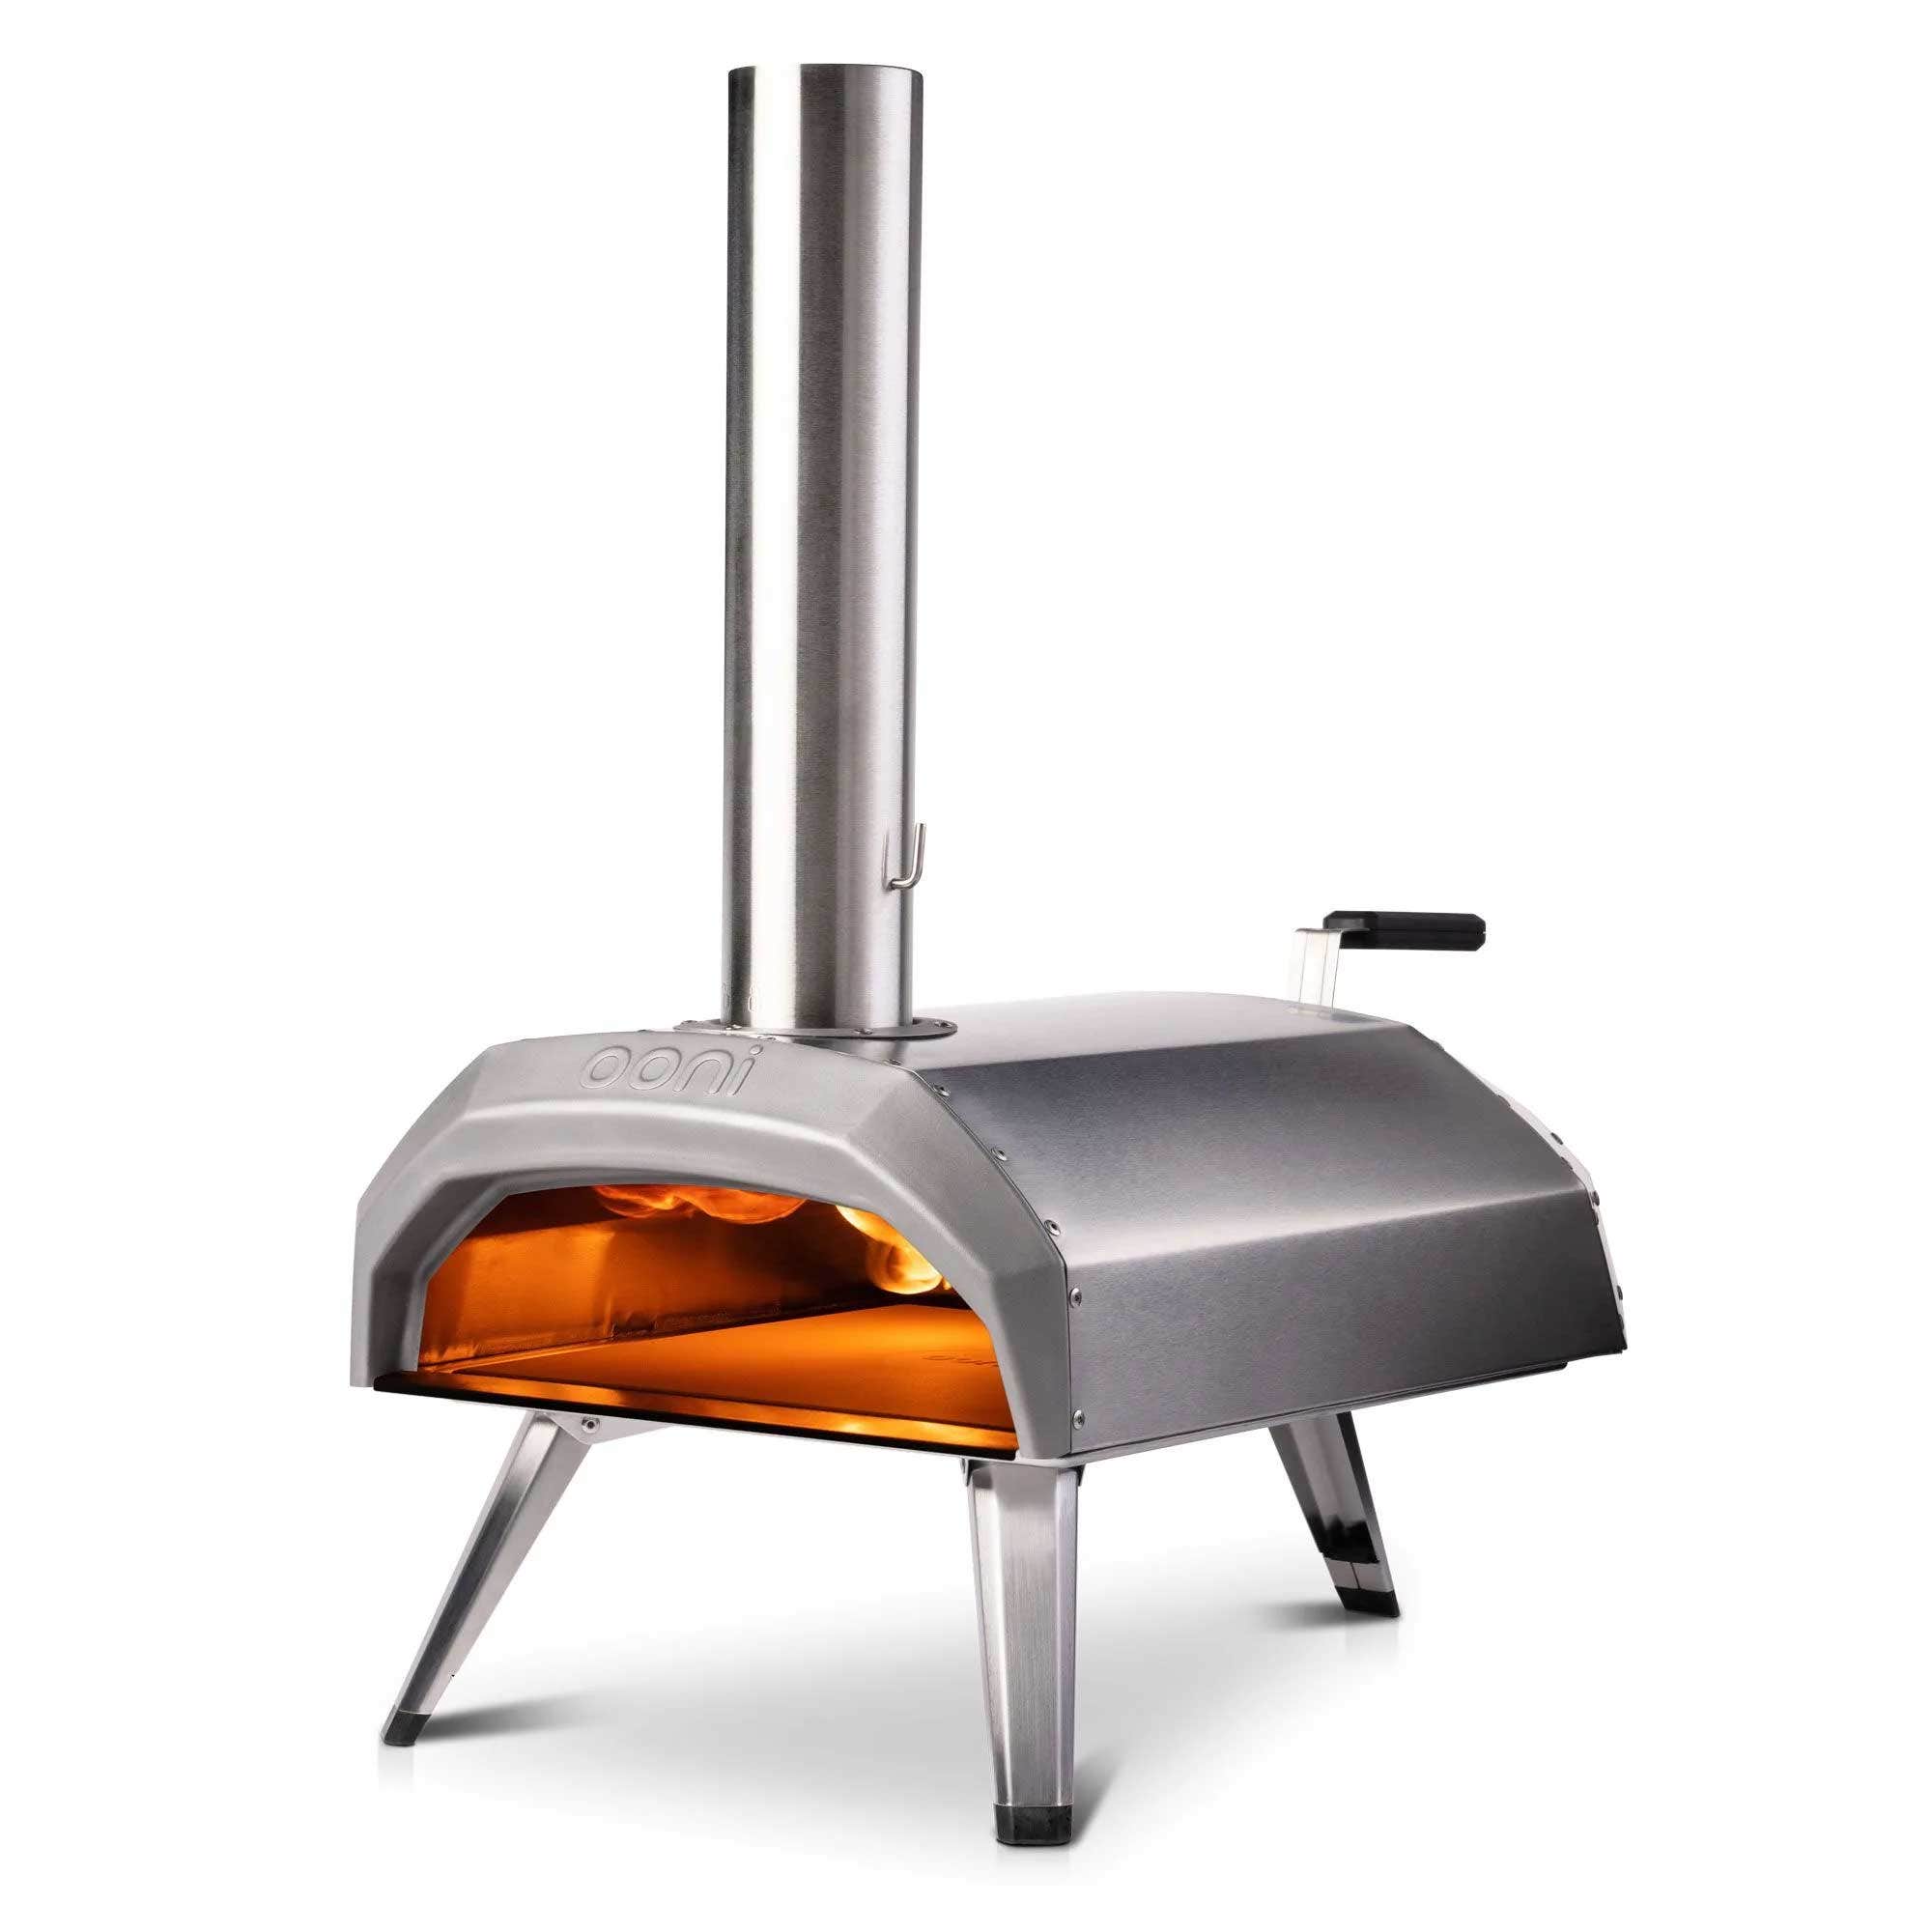 Fire up your Ooni pizza oven